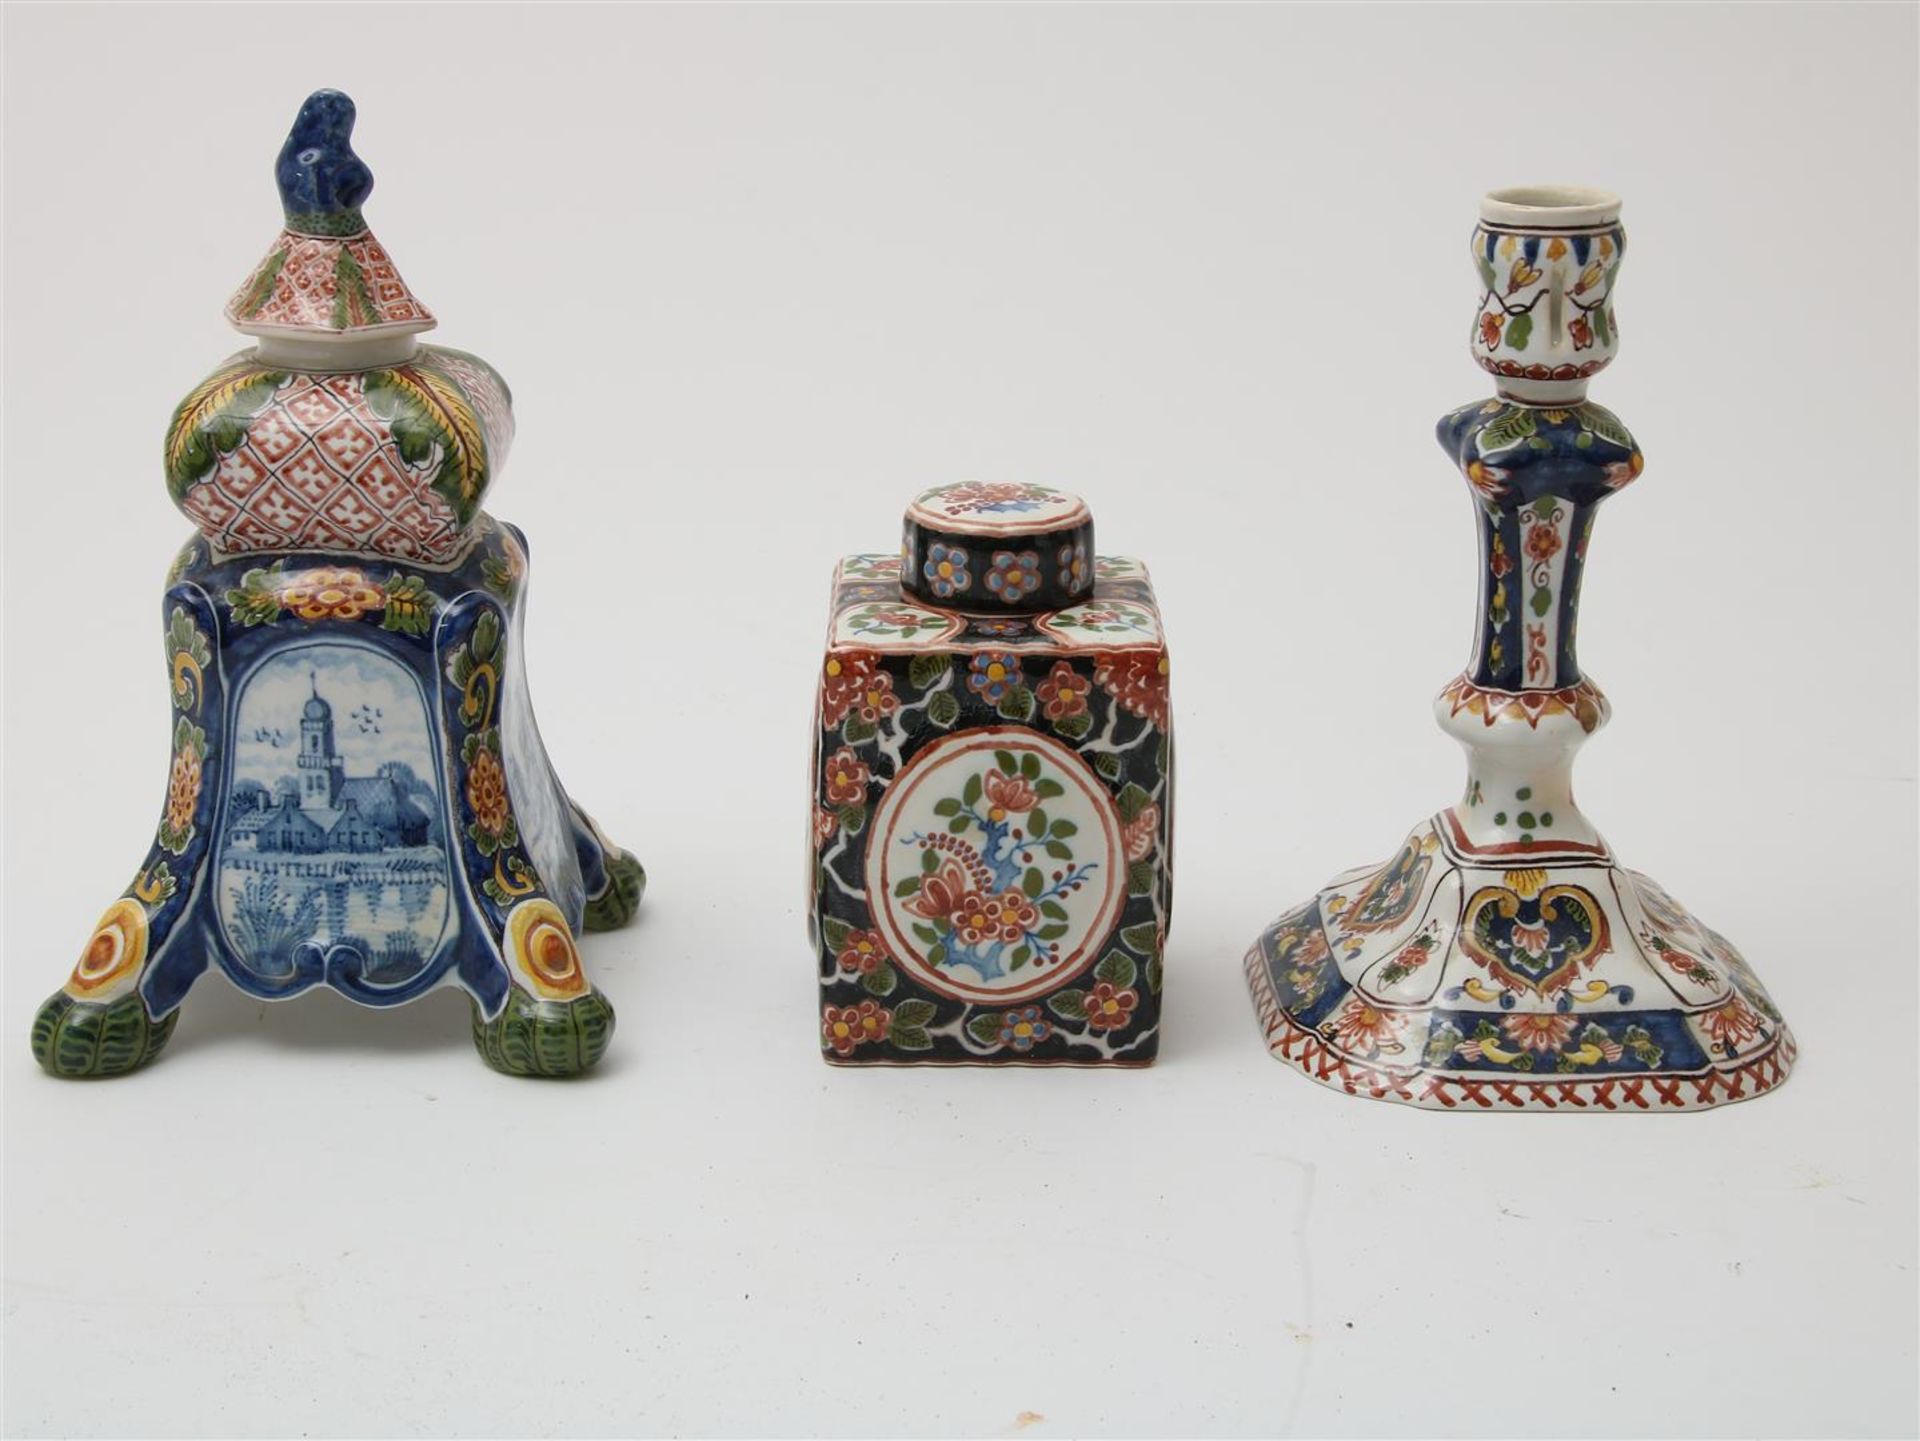 Lot of a polychrome earthenware candlestick, h. 21 cm., polychrome earthenware tea caddy, h. 13